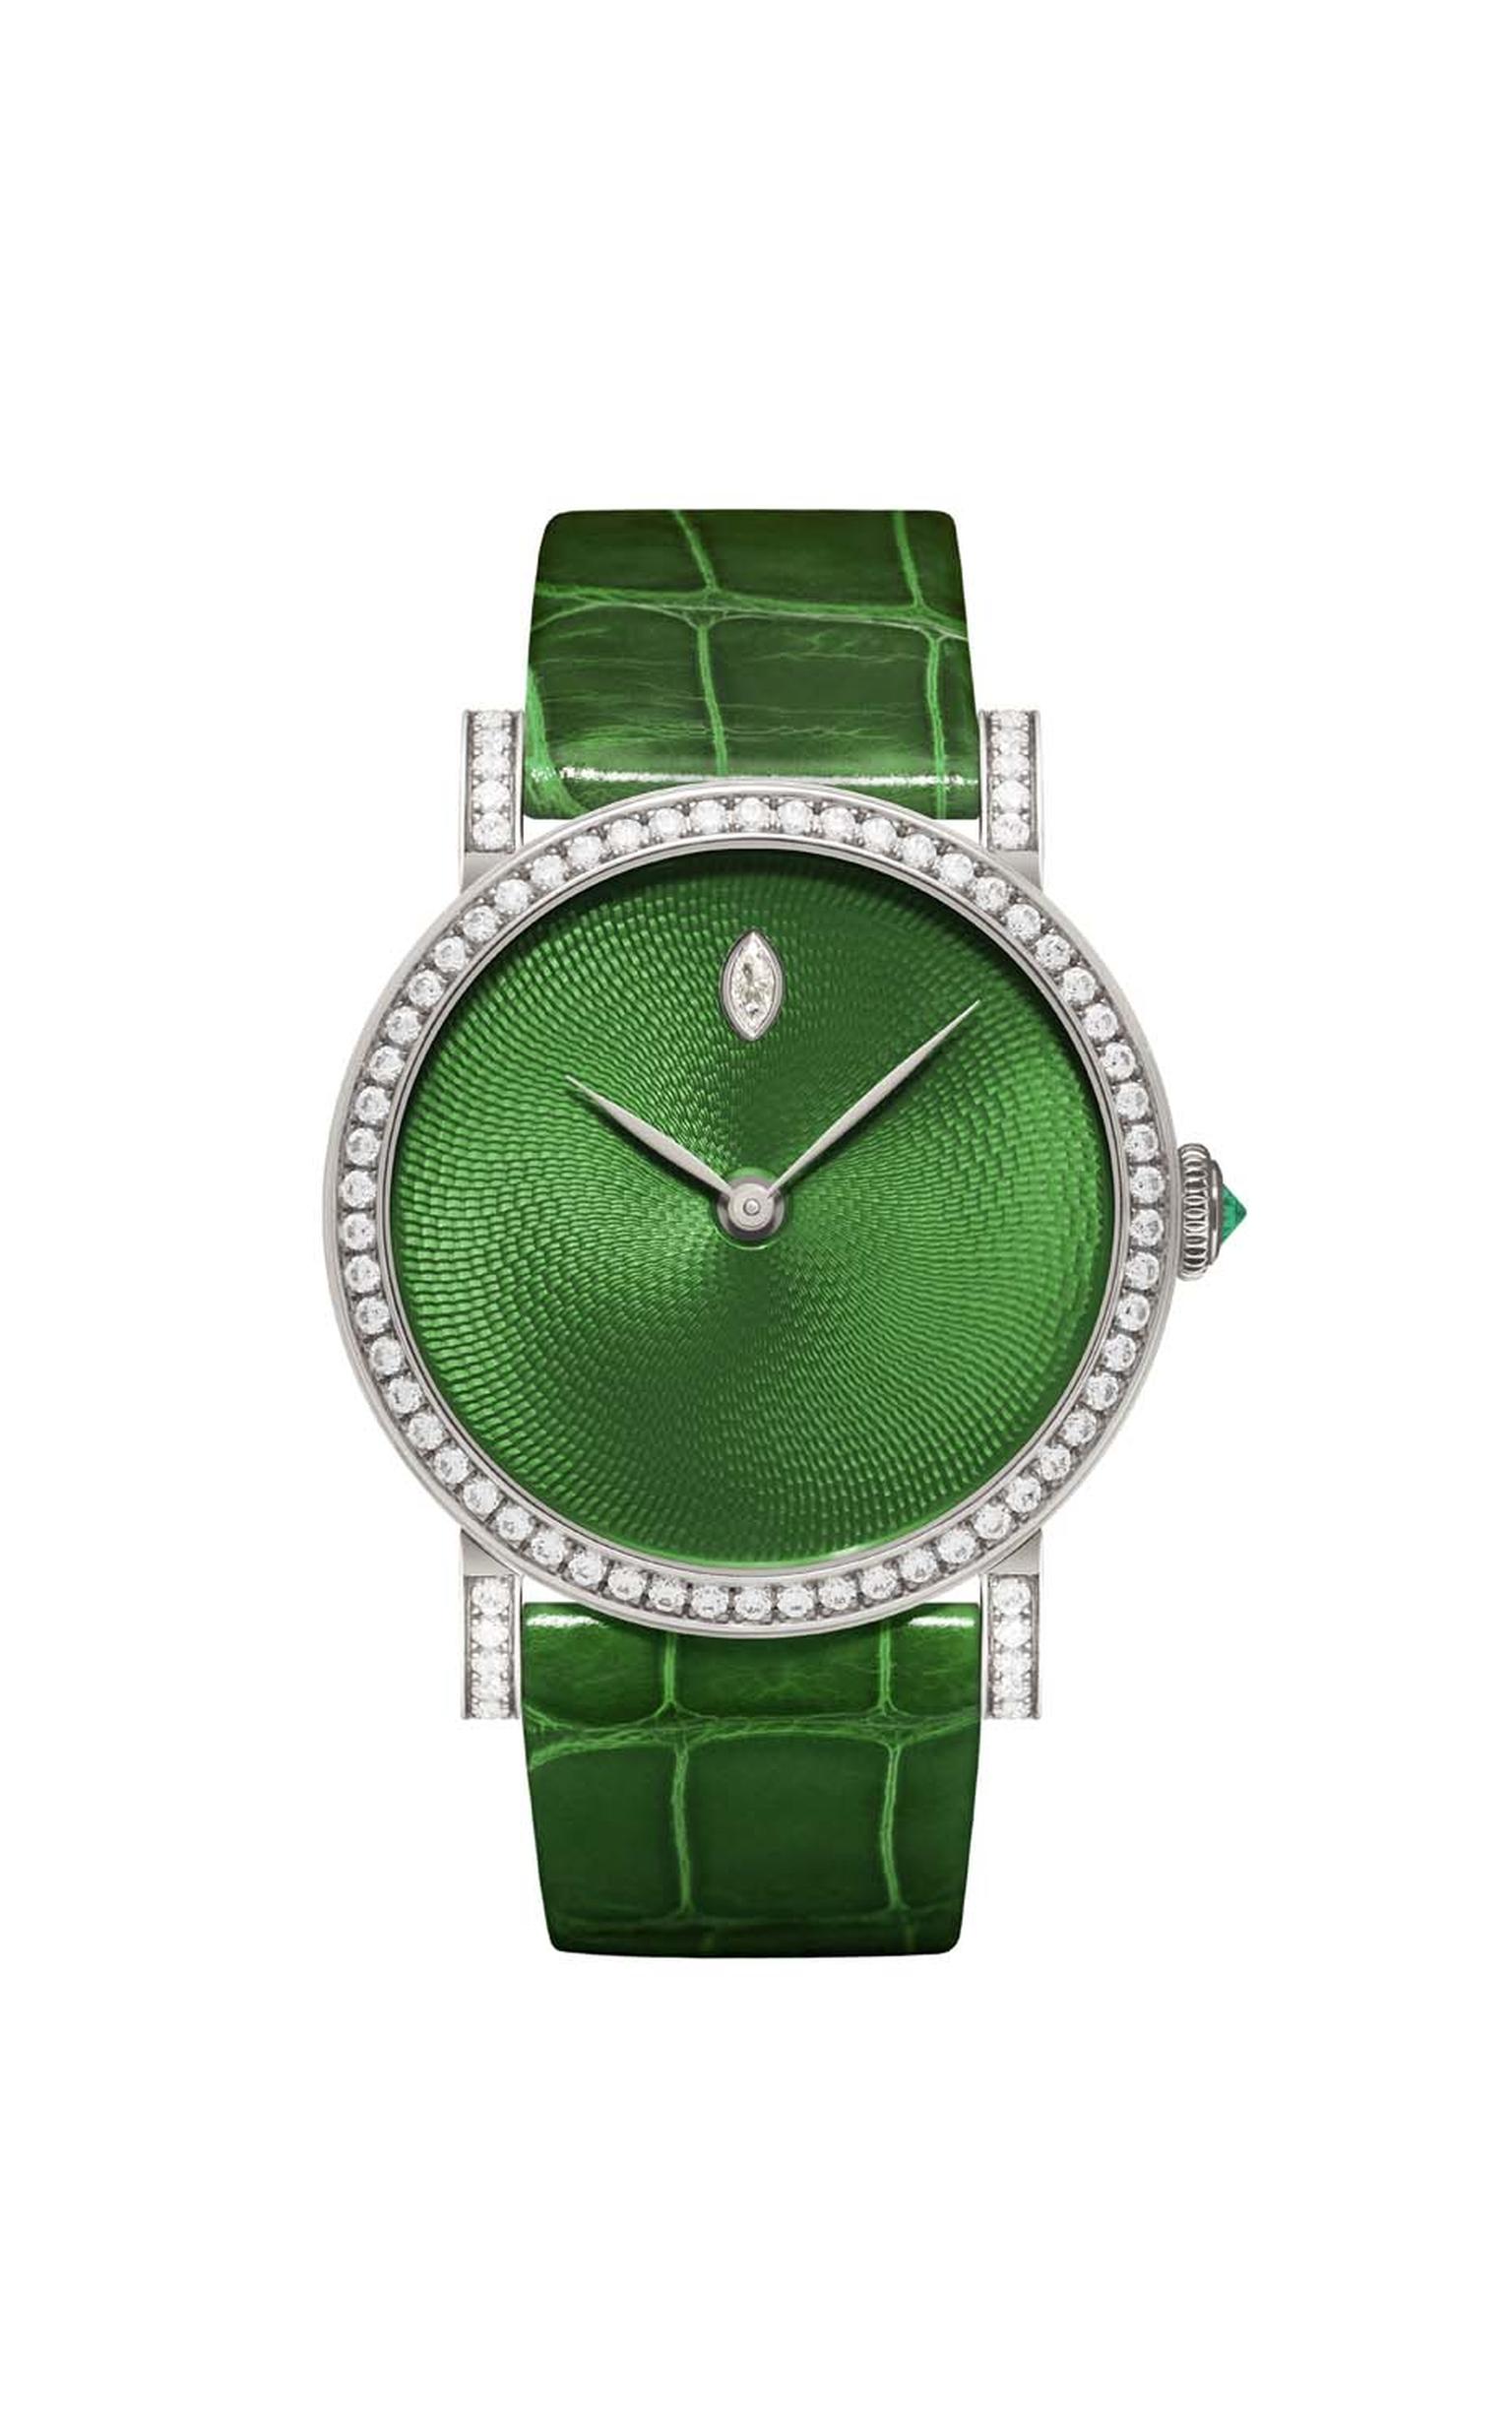 DeLaneau's one-of-a-kind Rondo Translucent Green watch